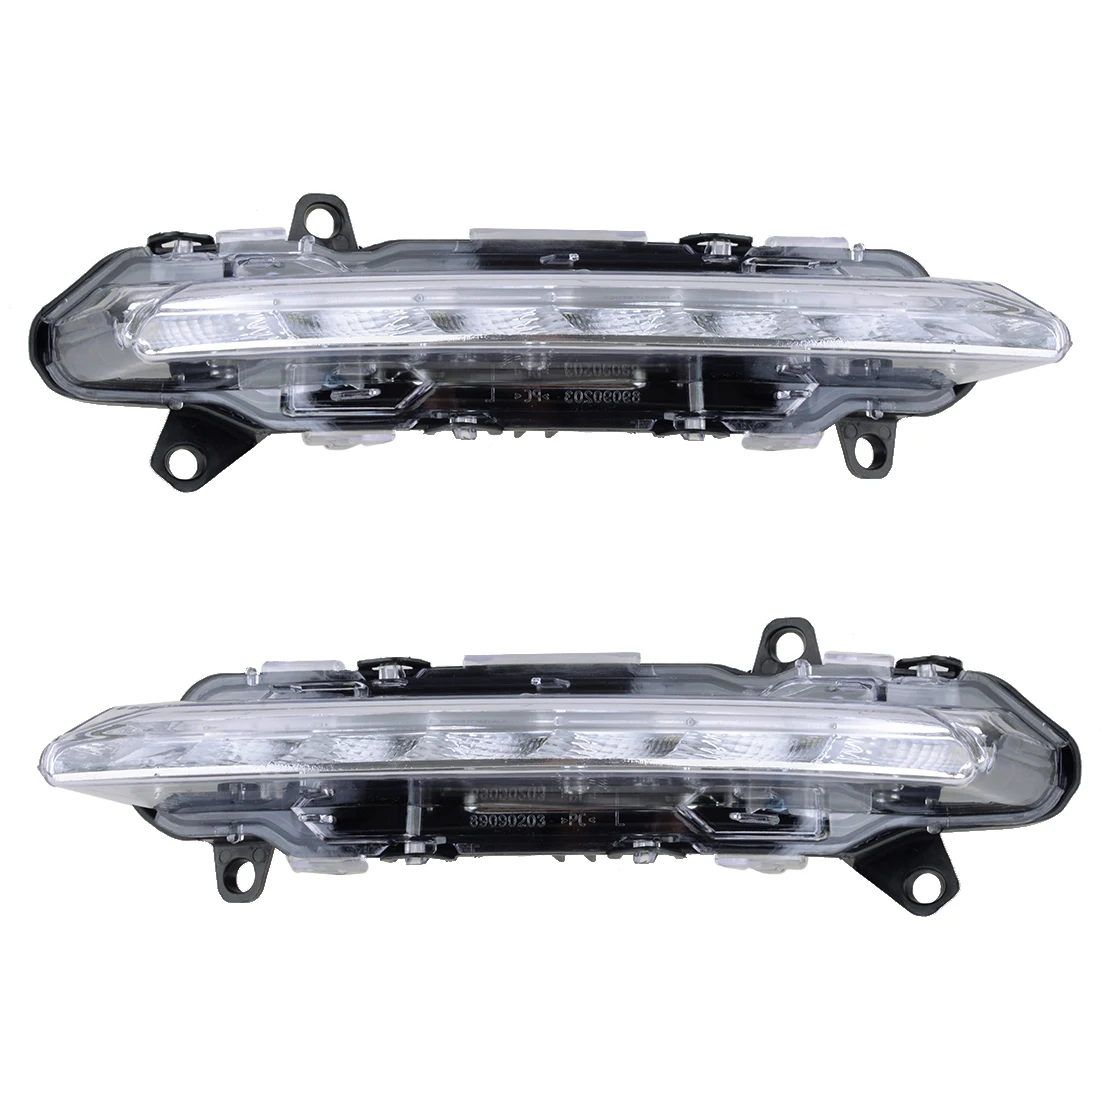 

A2218201856 1 Pair Car Front LED Bumper DRL Fog Light 12V A2218201756 Fit For Mercedes Benz S W221 S350 S400 S450 S500 S550 S600